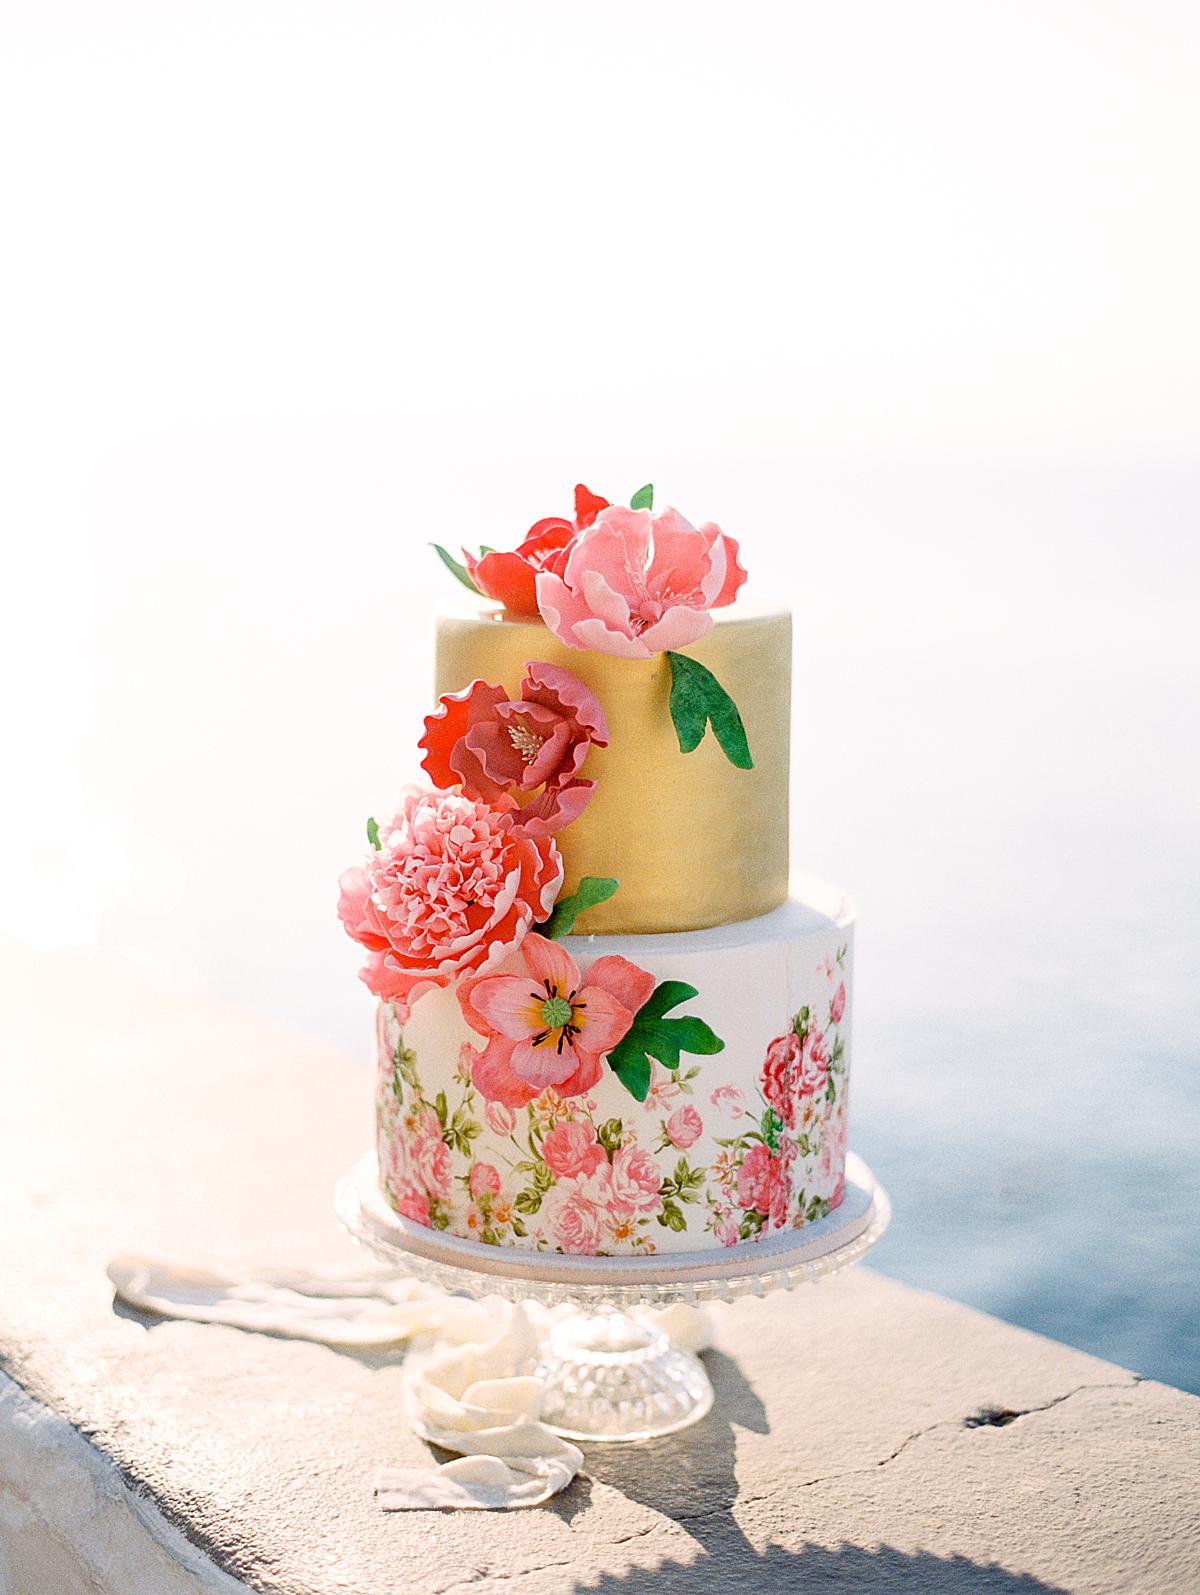 two tiers destination wedding cake that is very colorful and with flower details painted by hand for a hydra wedding